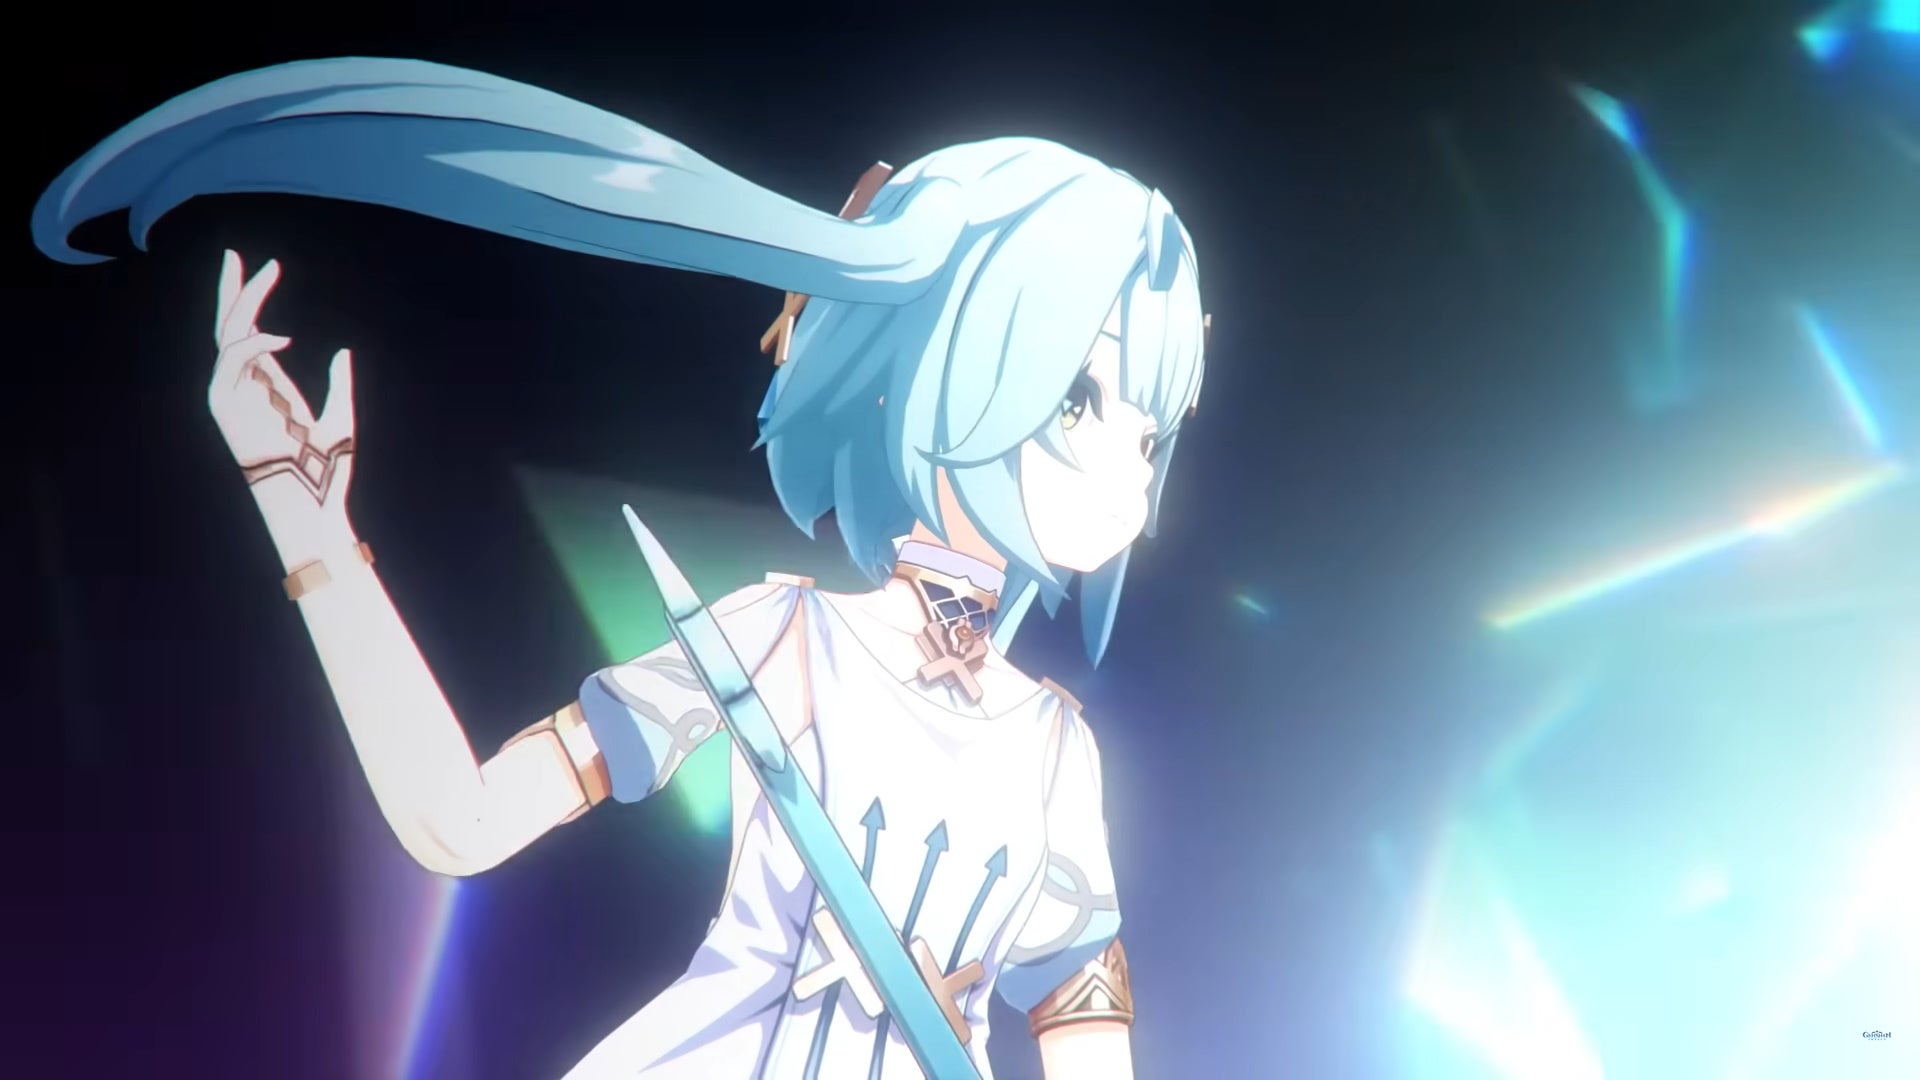 Genshin Faruzan teams: An anime girl in a white dress and with blue pigtails is creating a blue whirlwind, the force of which is blowing her hair back